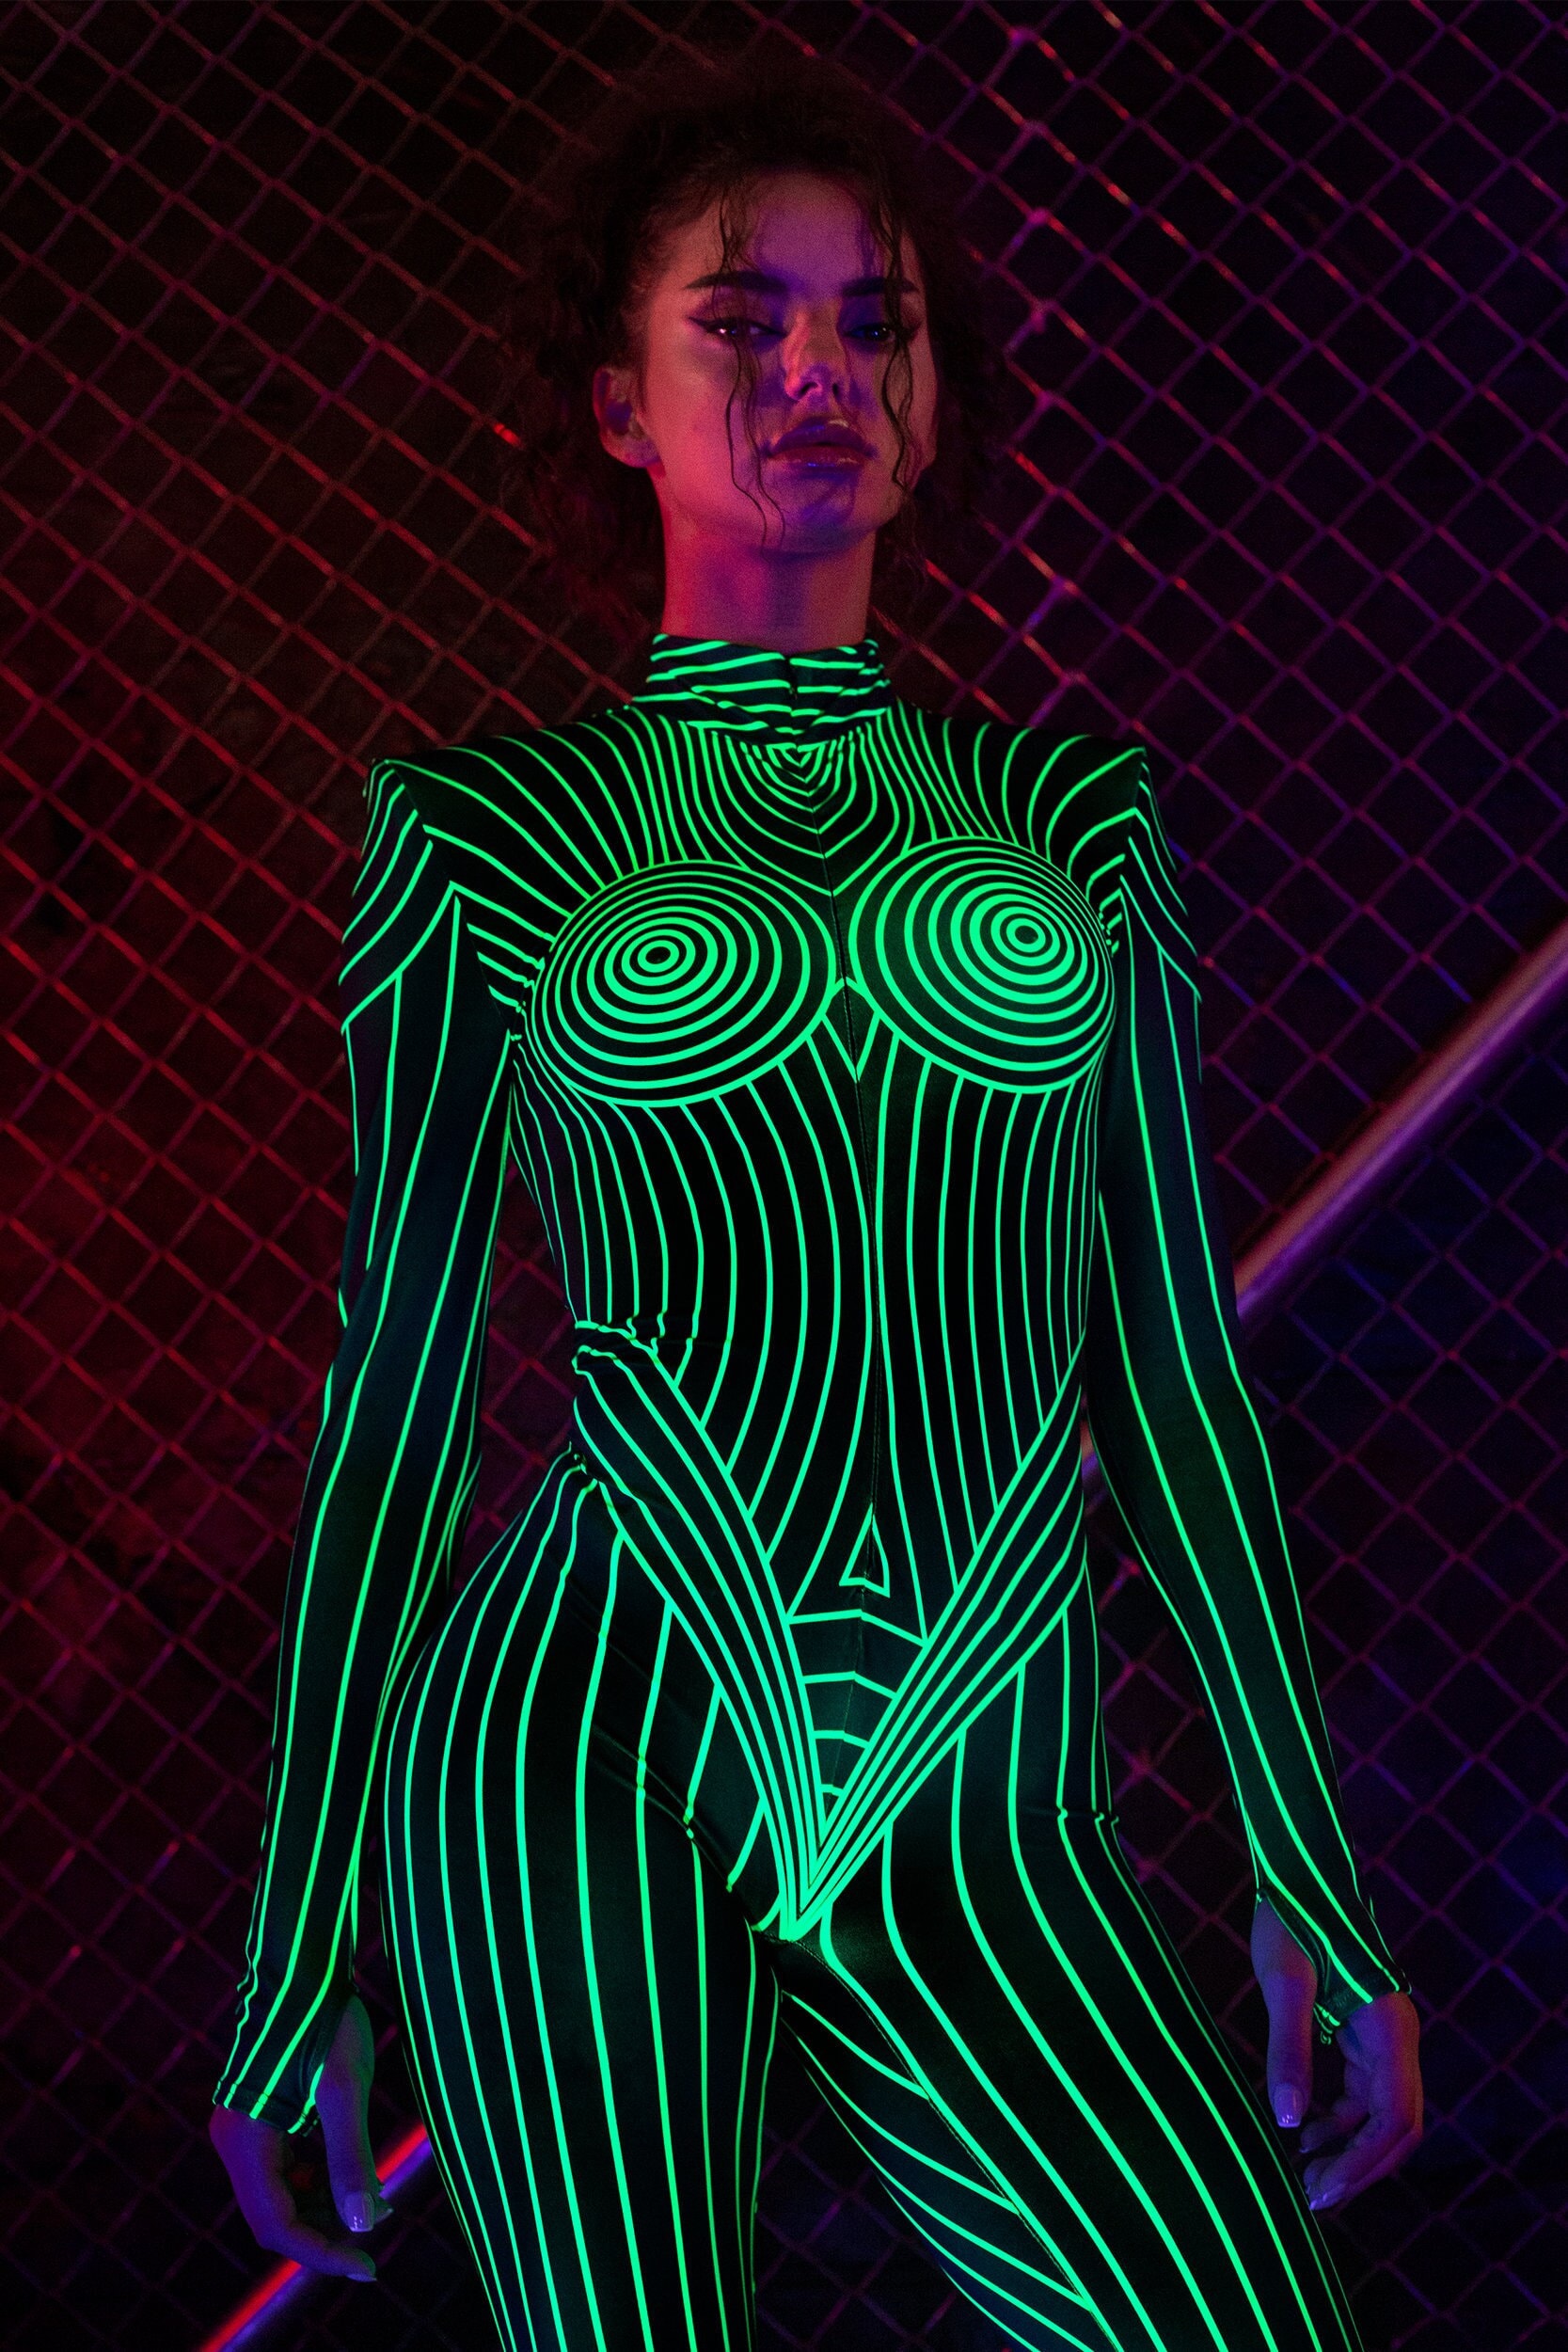 Pin by Elleee on DIY  Body painting, Blacklight party, Glow in